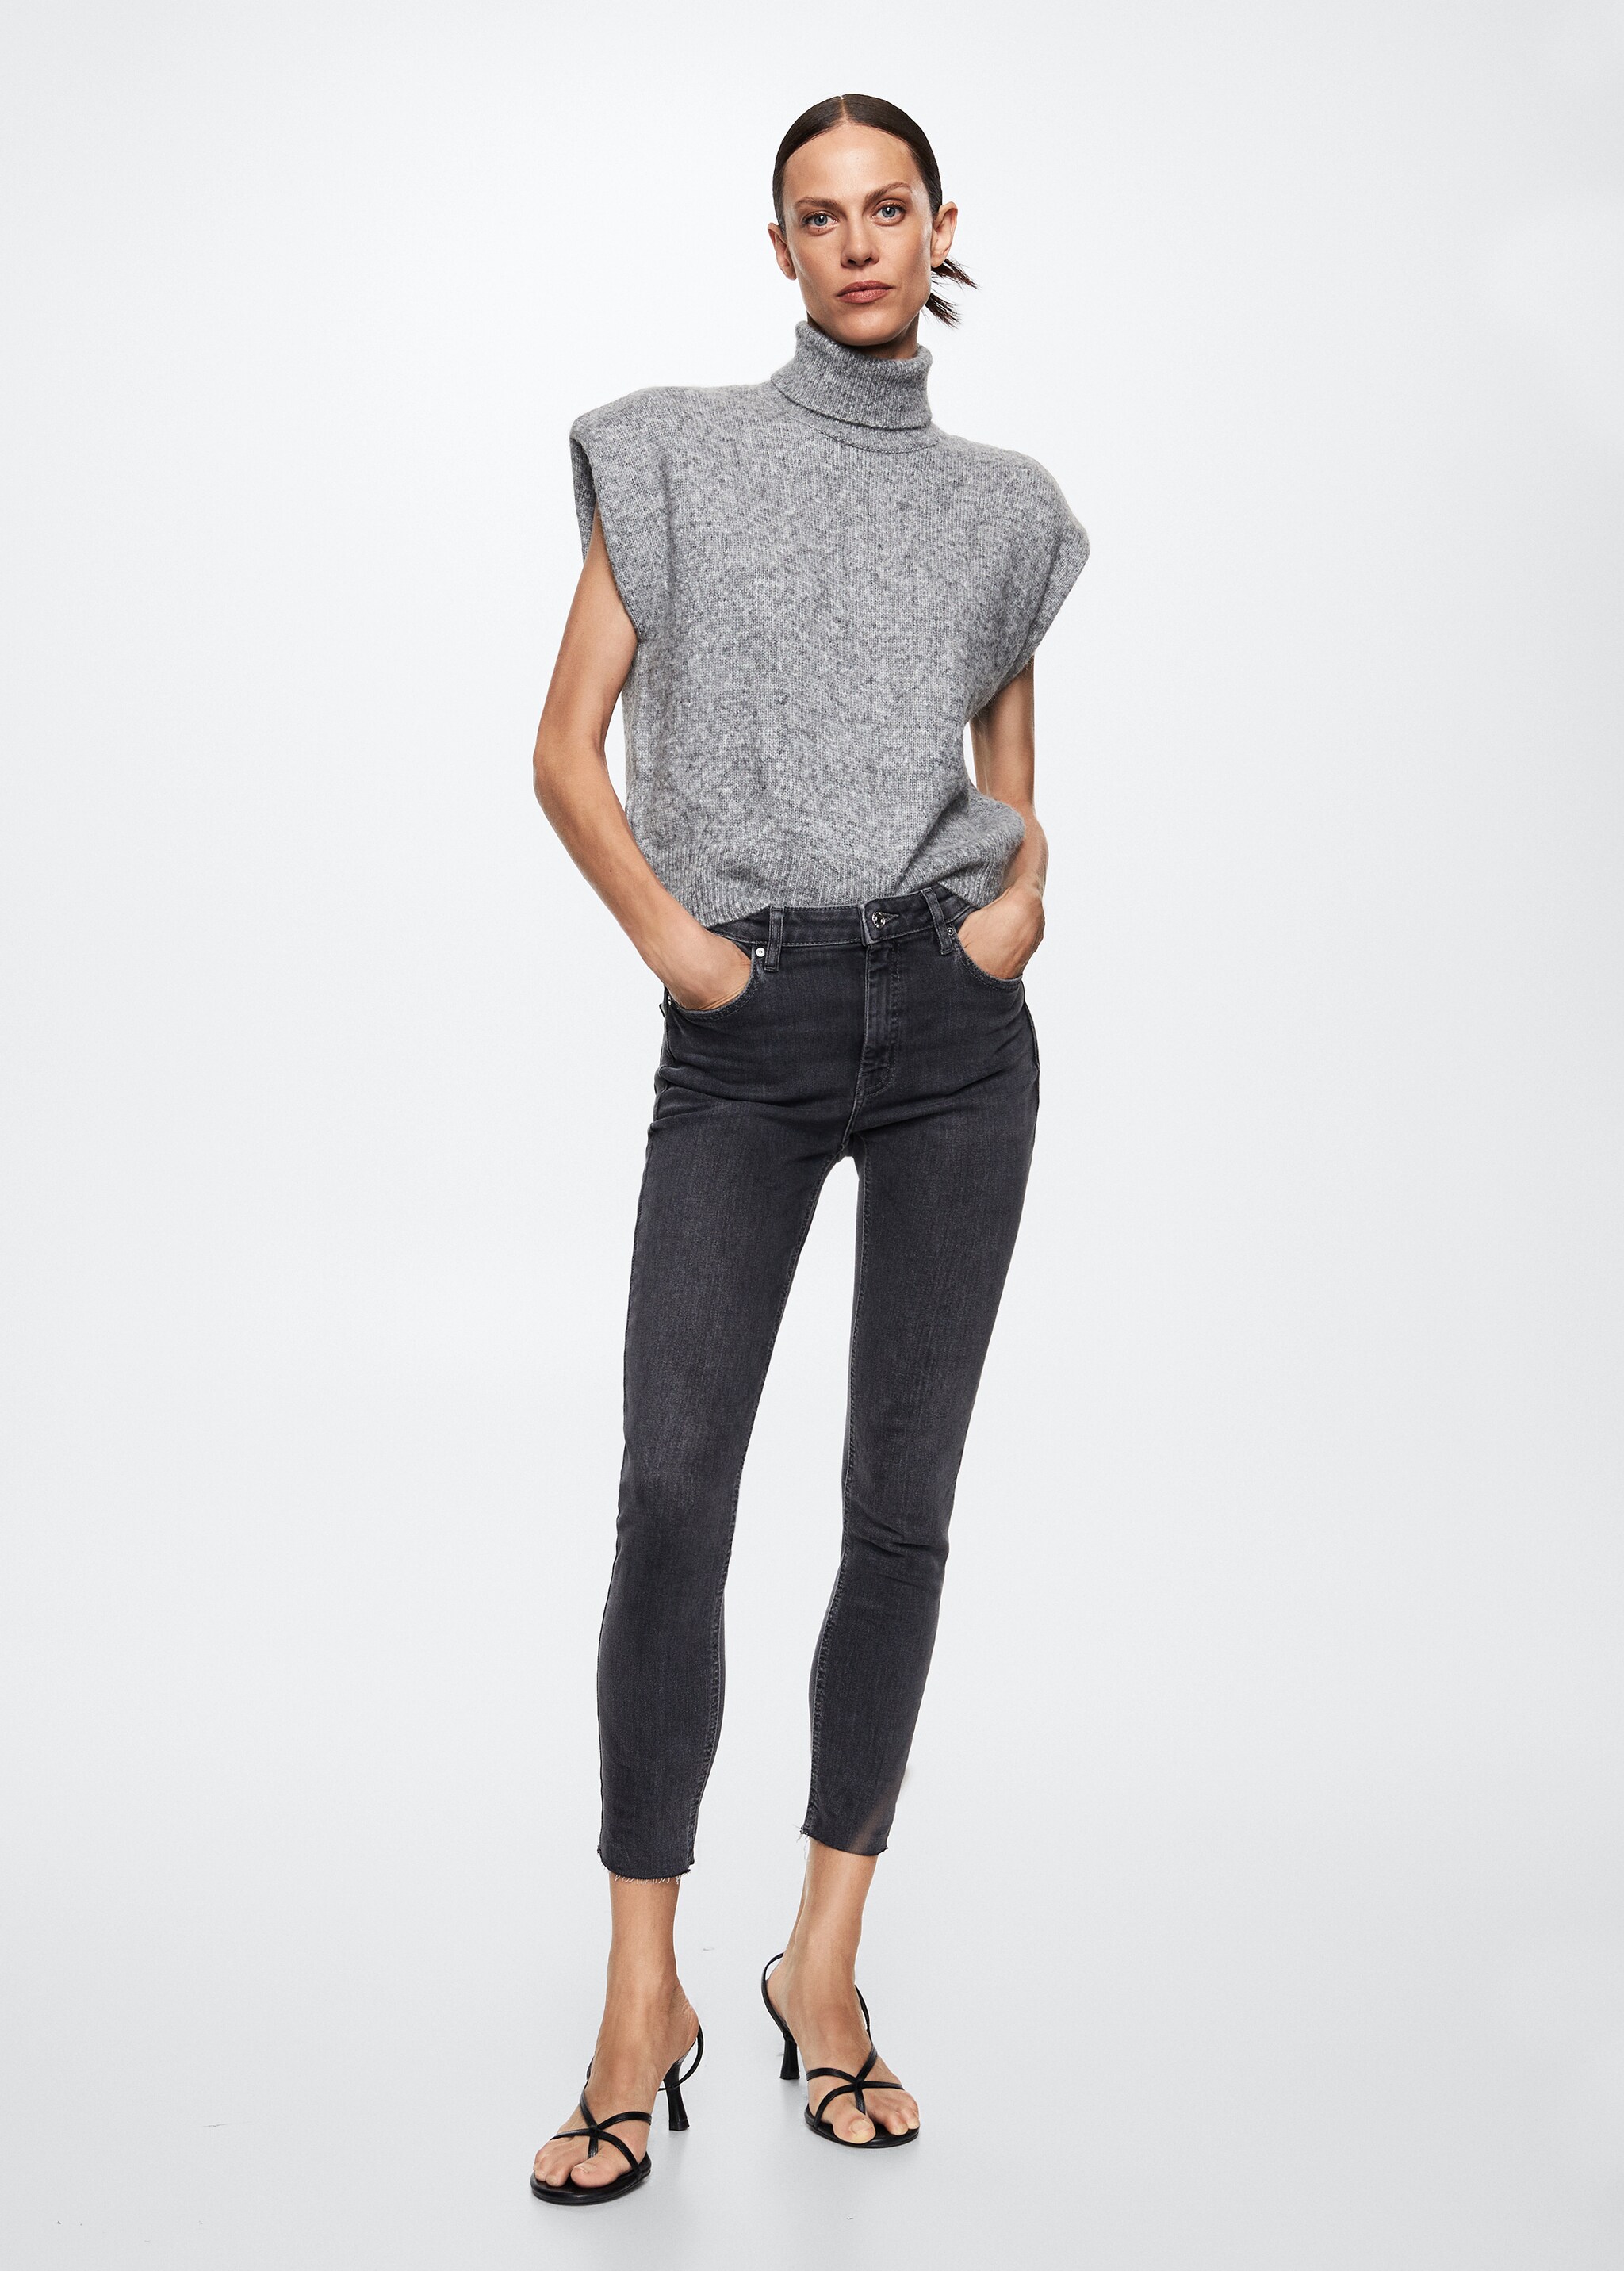 Skinny cropped jeans - General plane